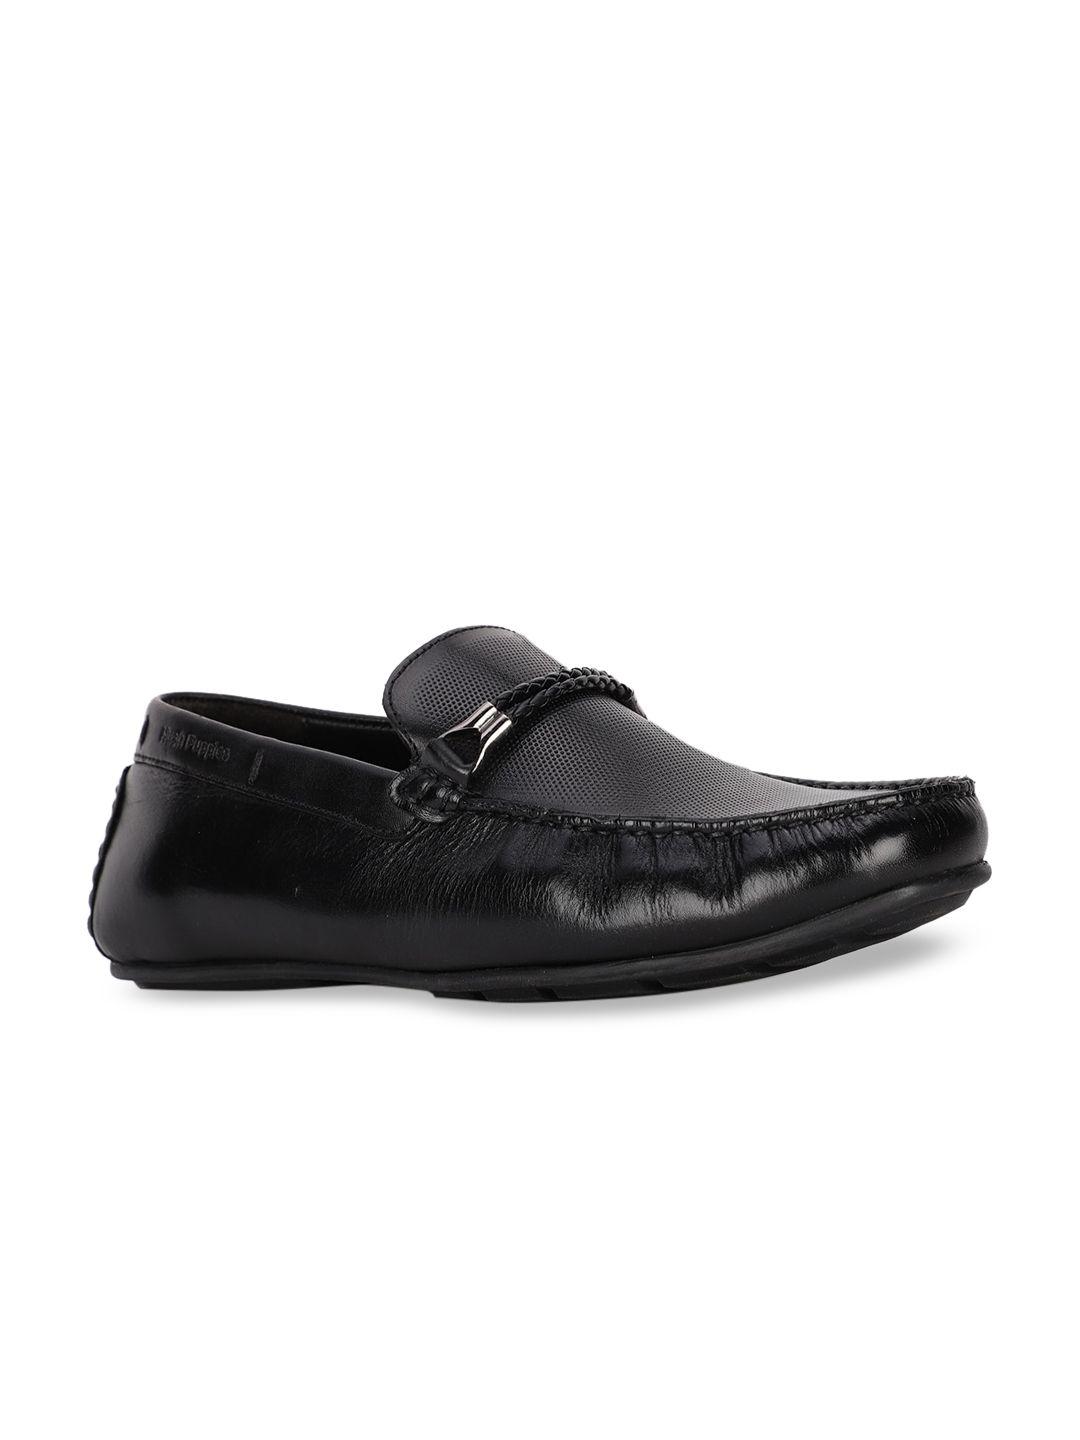 hush puppies men black woven design leather loafers